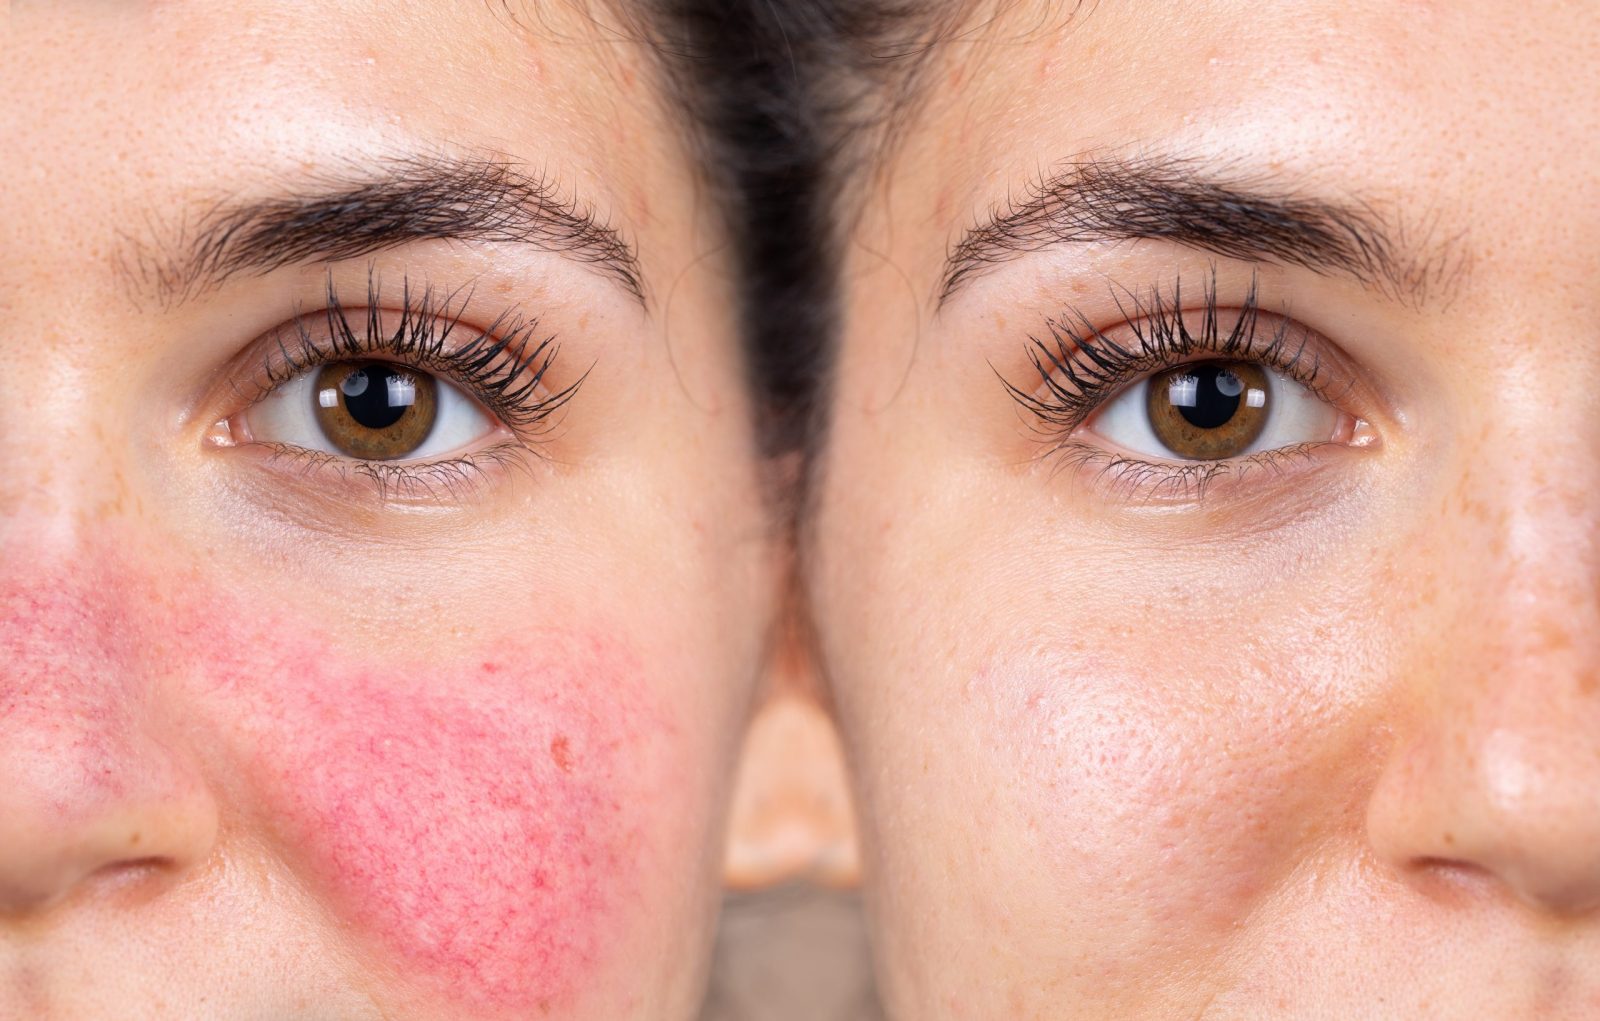 Coping with Rosacea